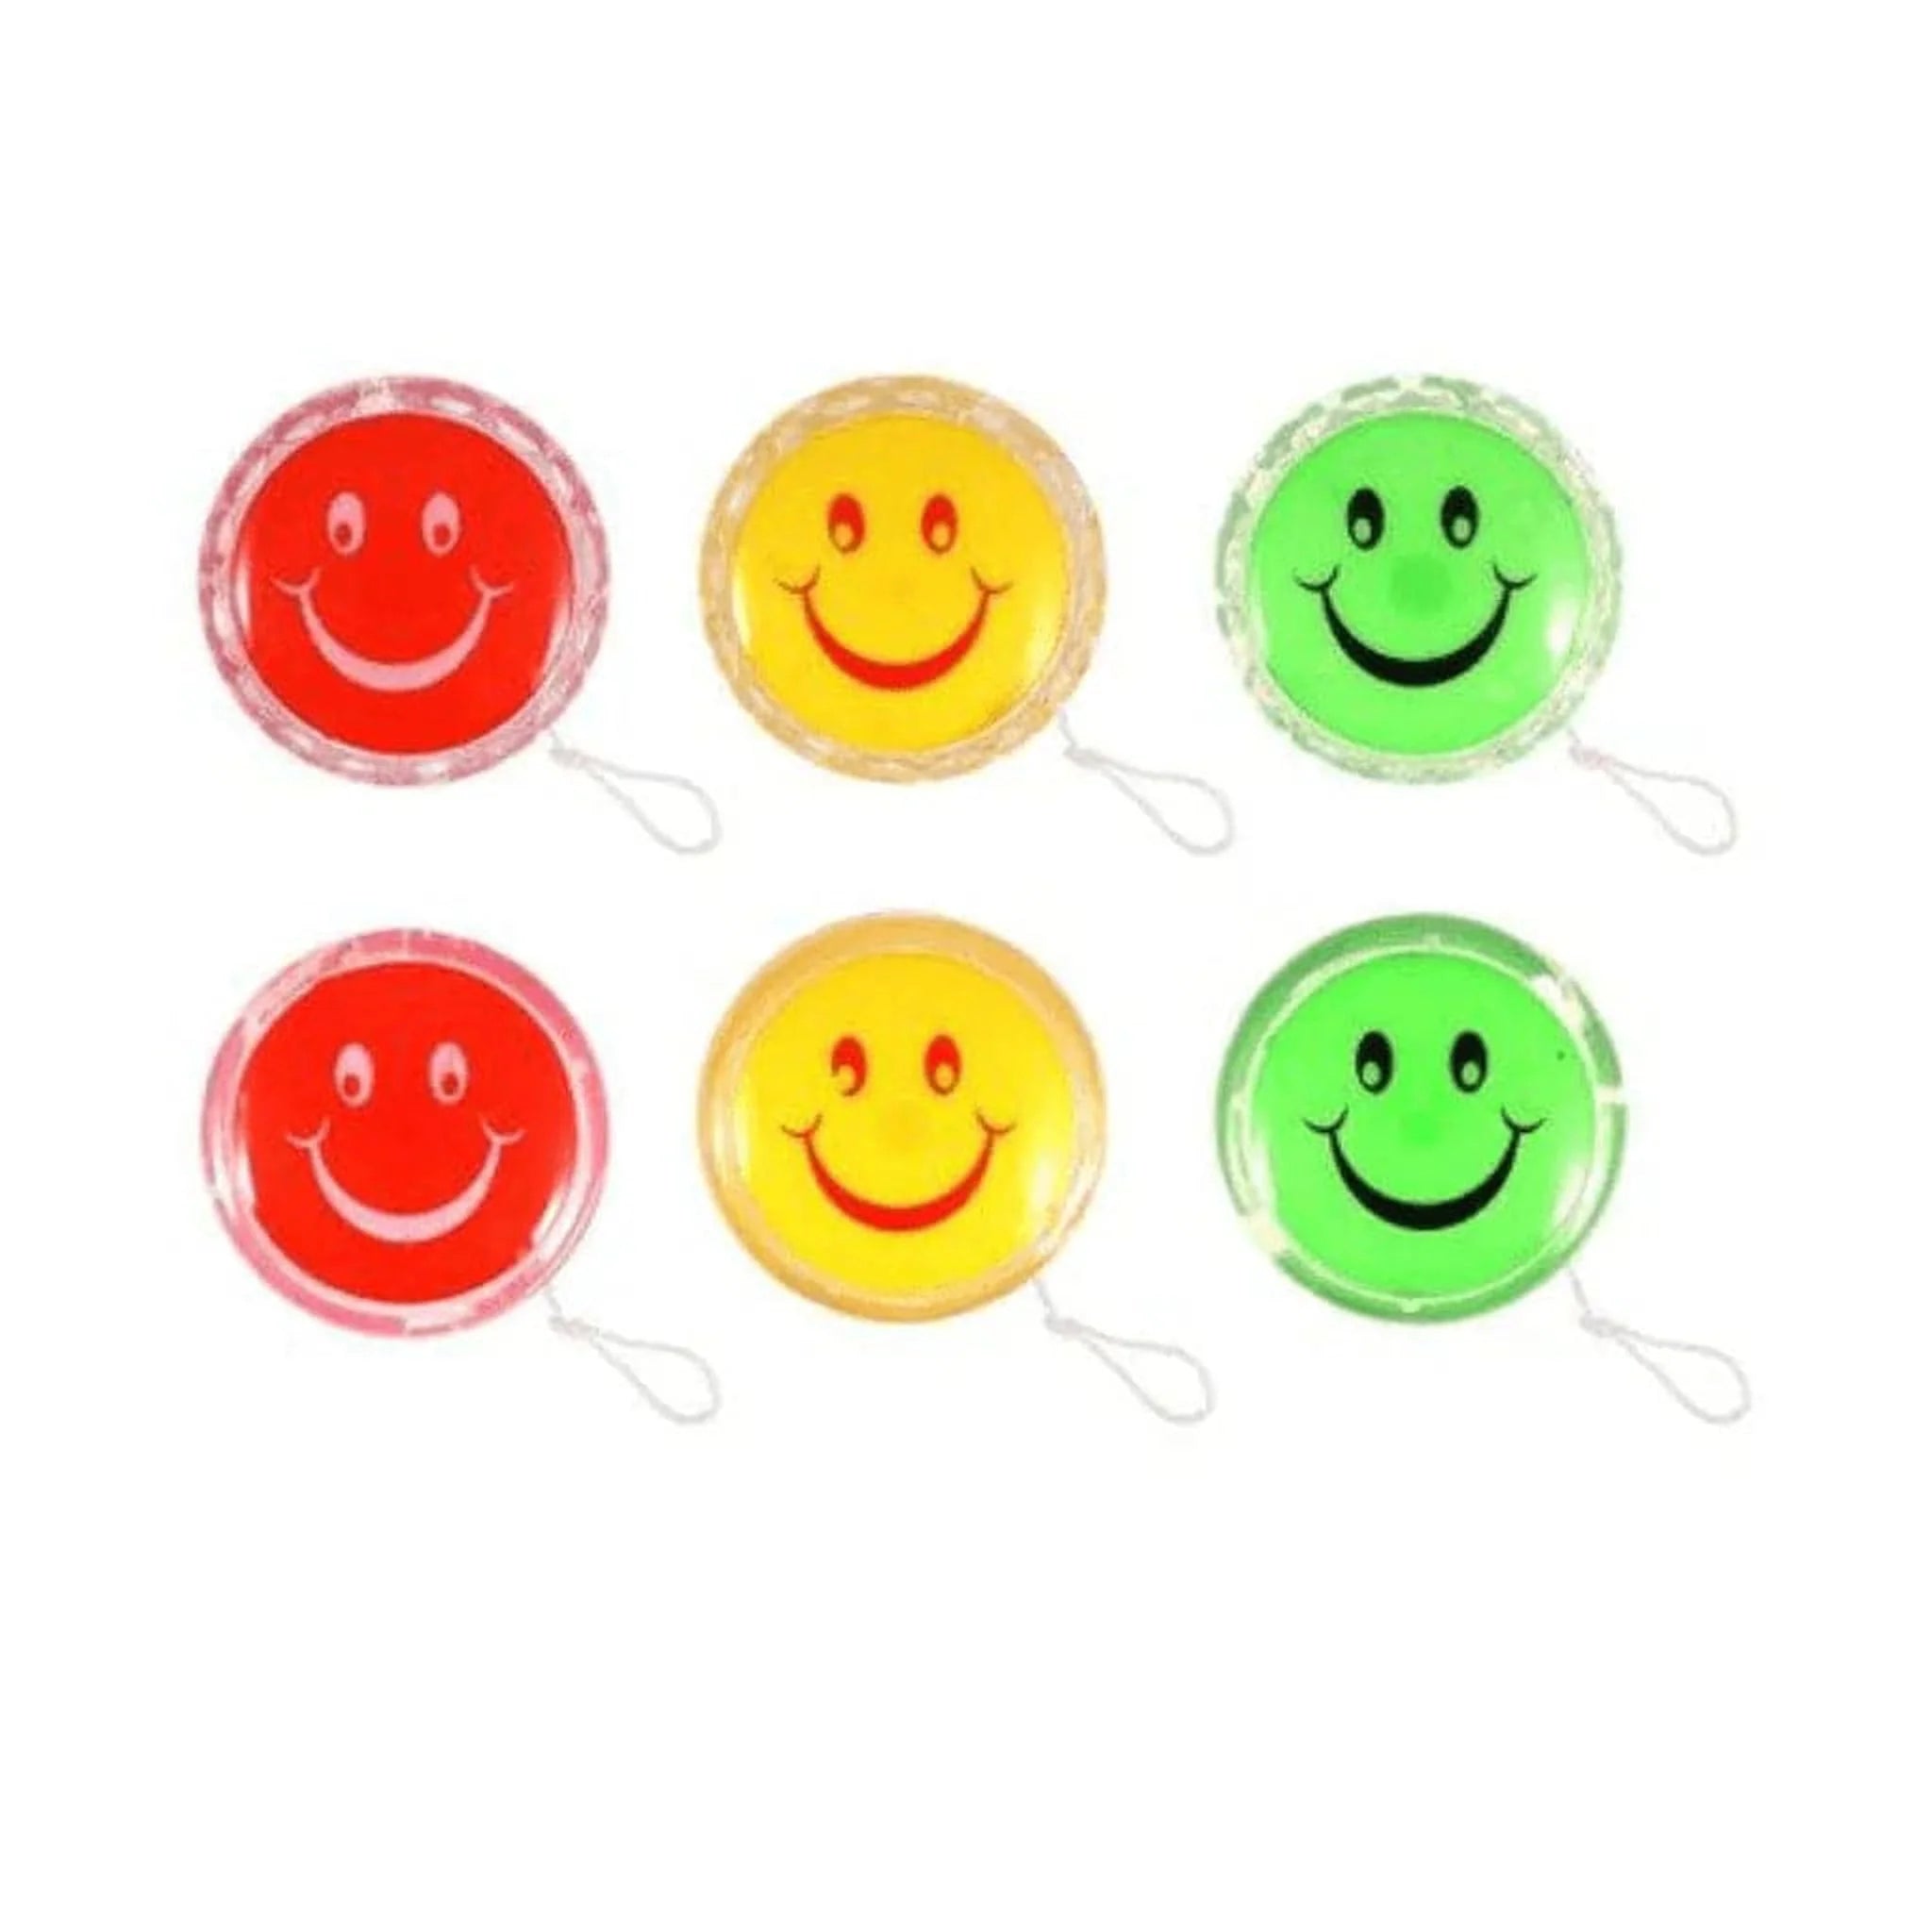 Return Tops with Smiling Faces - Kids Party Craft